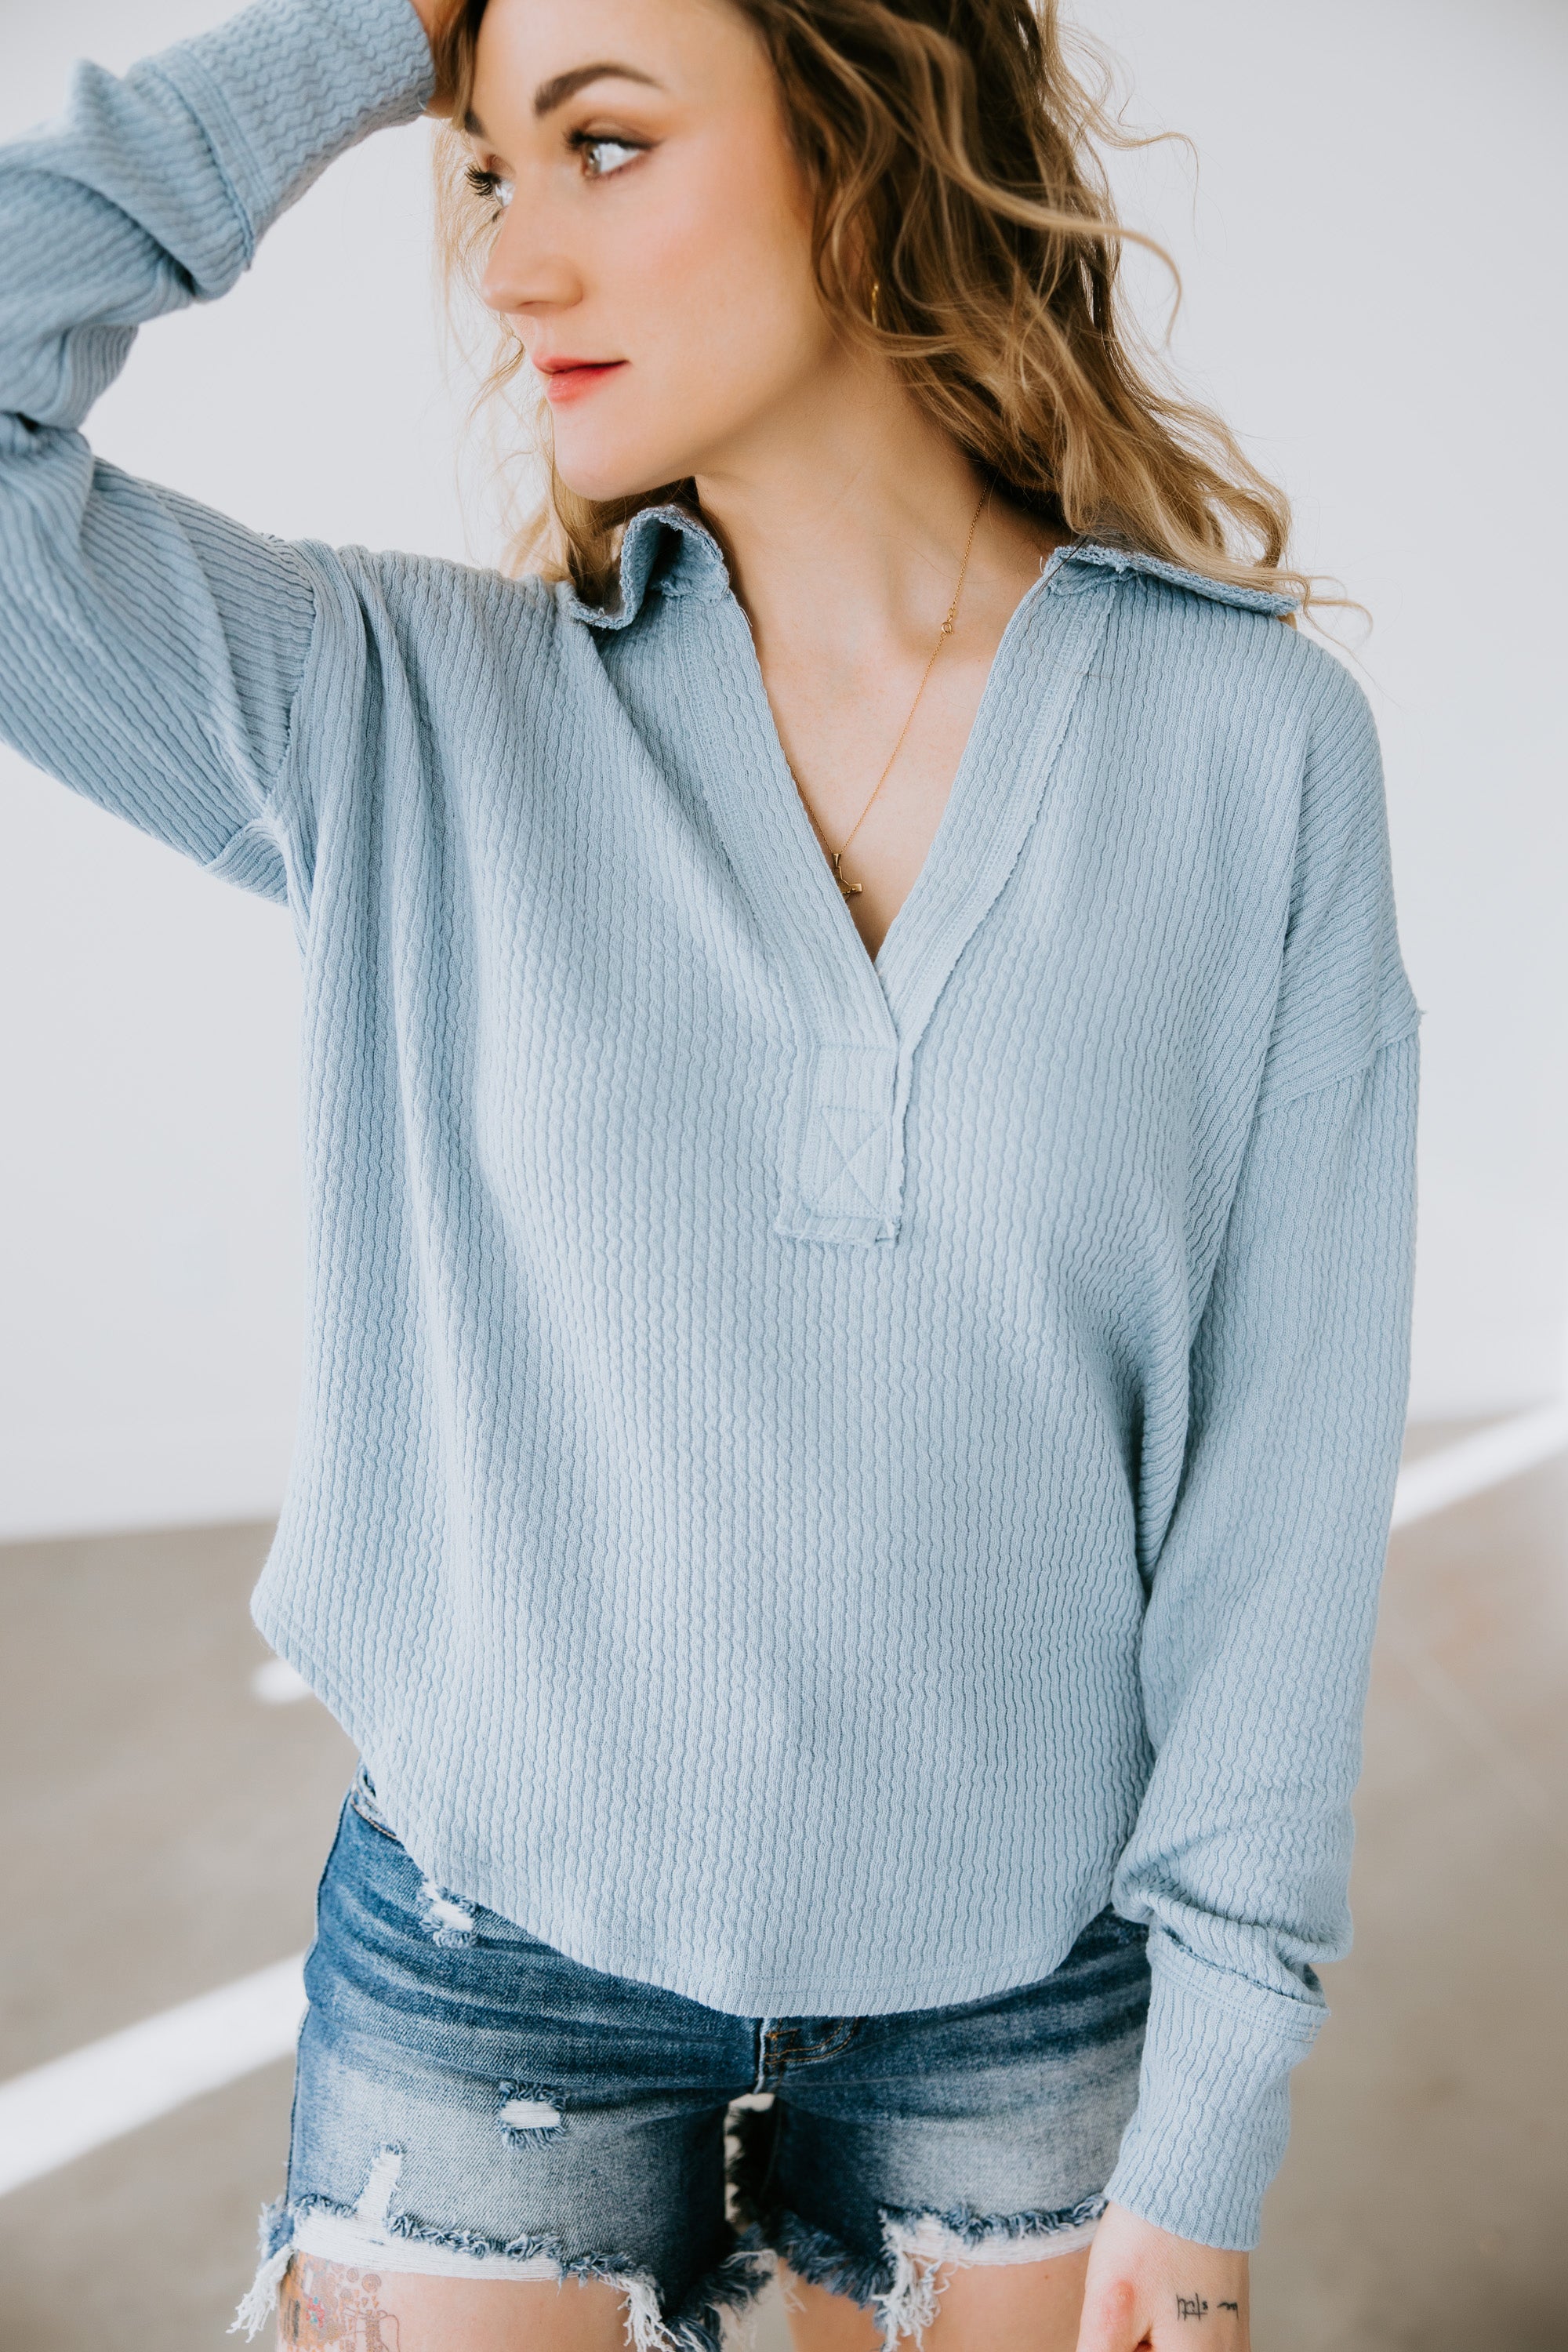 image of Dylon Knit Top